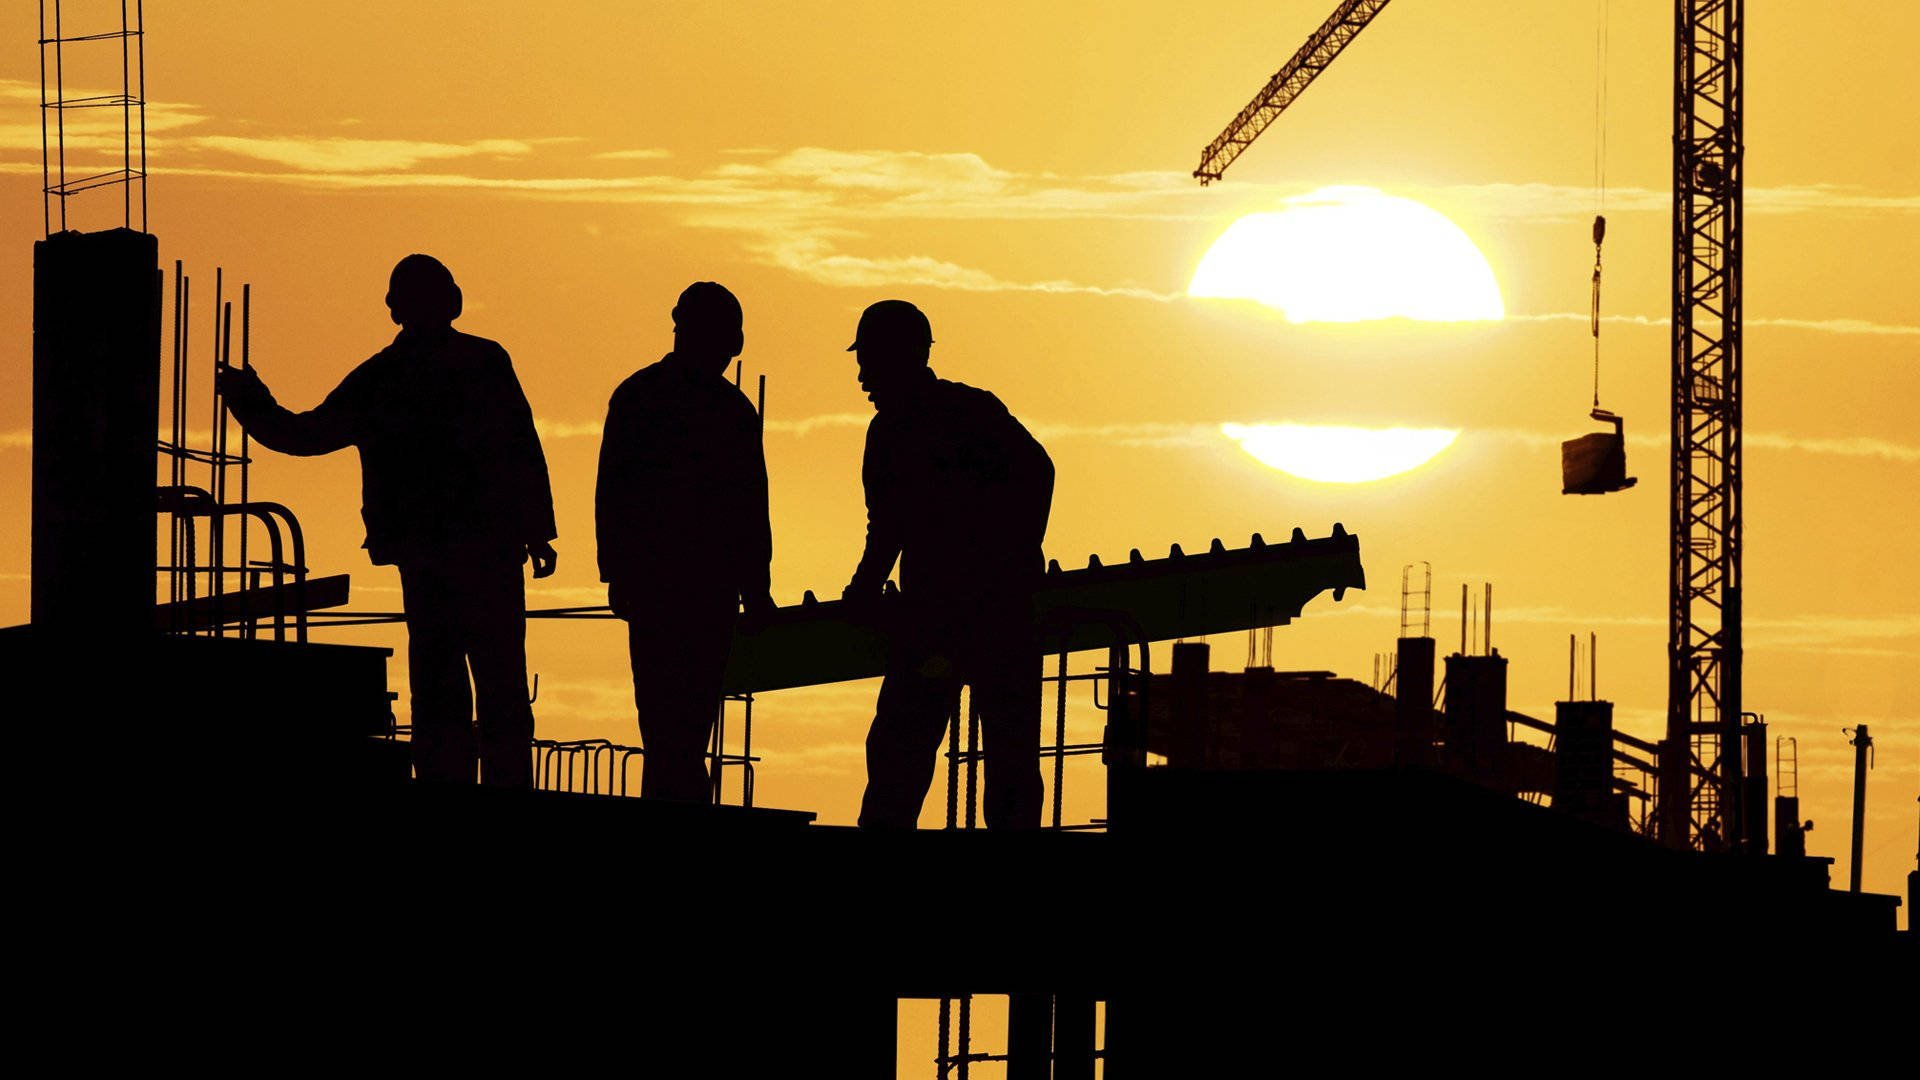 Silhouette Construction Workers Wallpaper